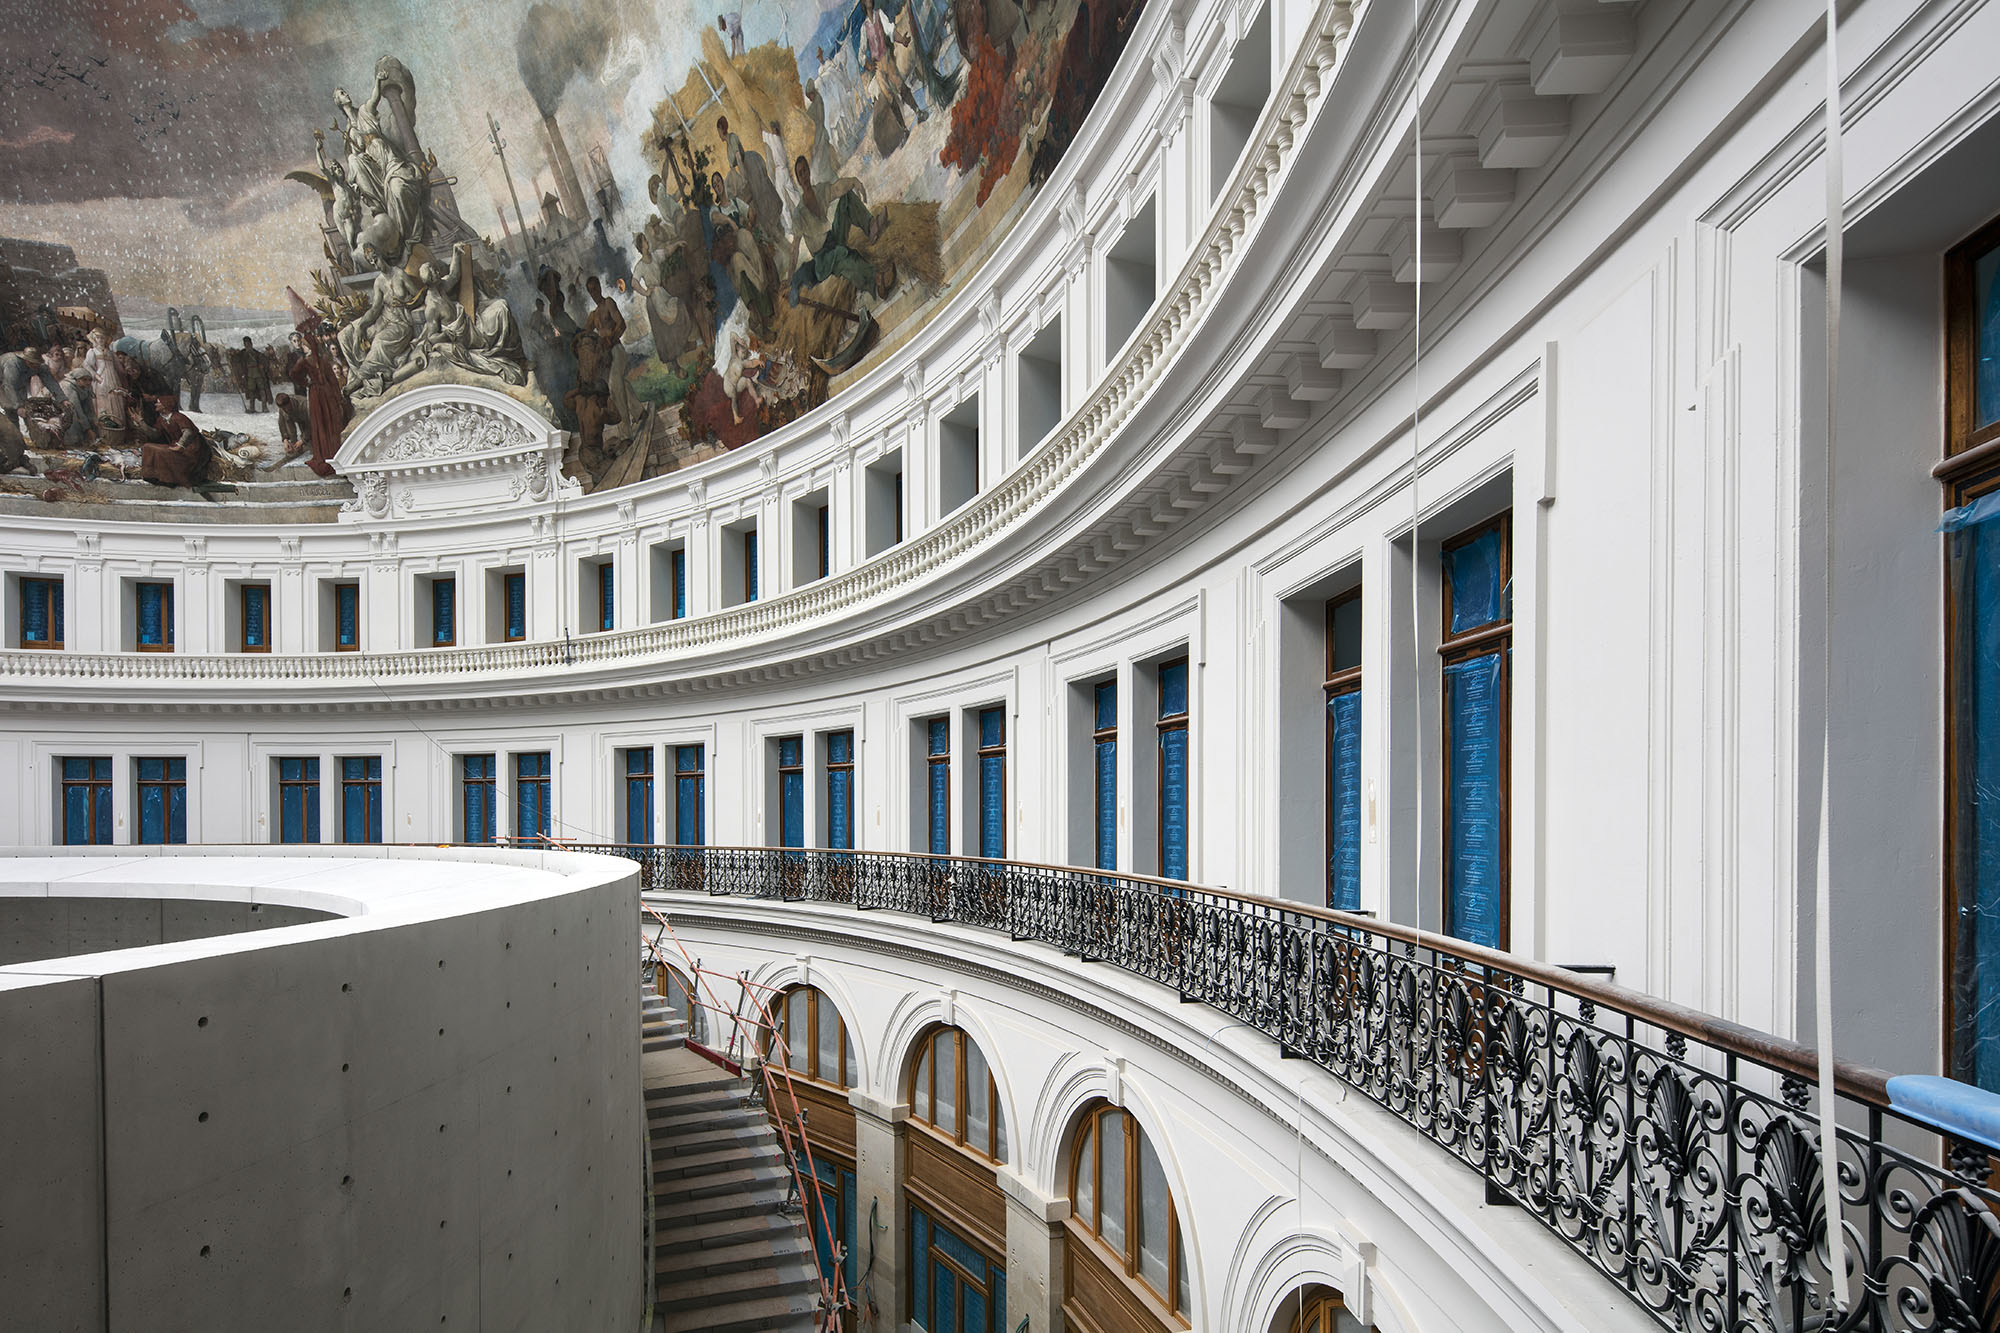 curved space with painted ceiling inside the Bourse de Commerce